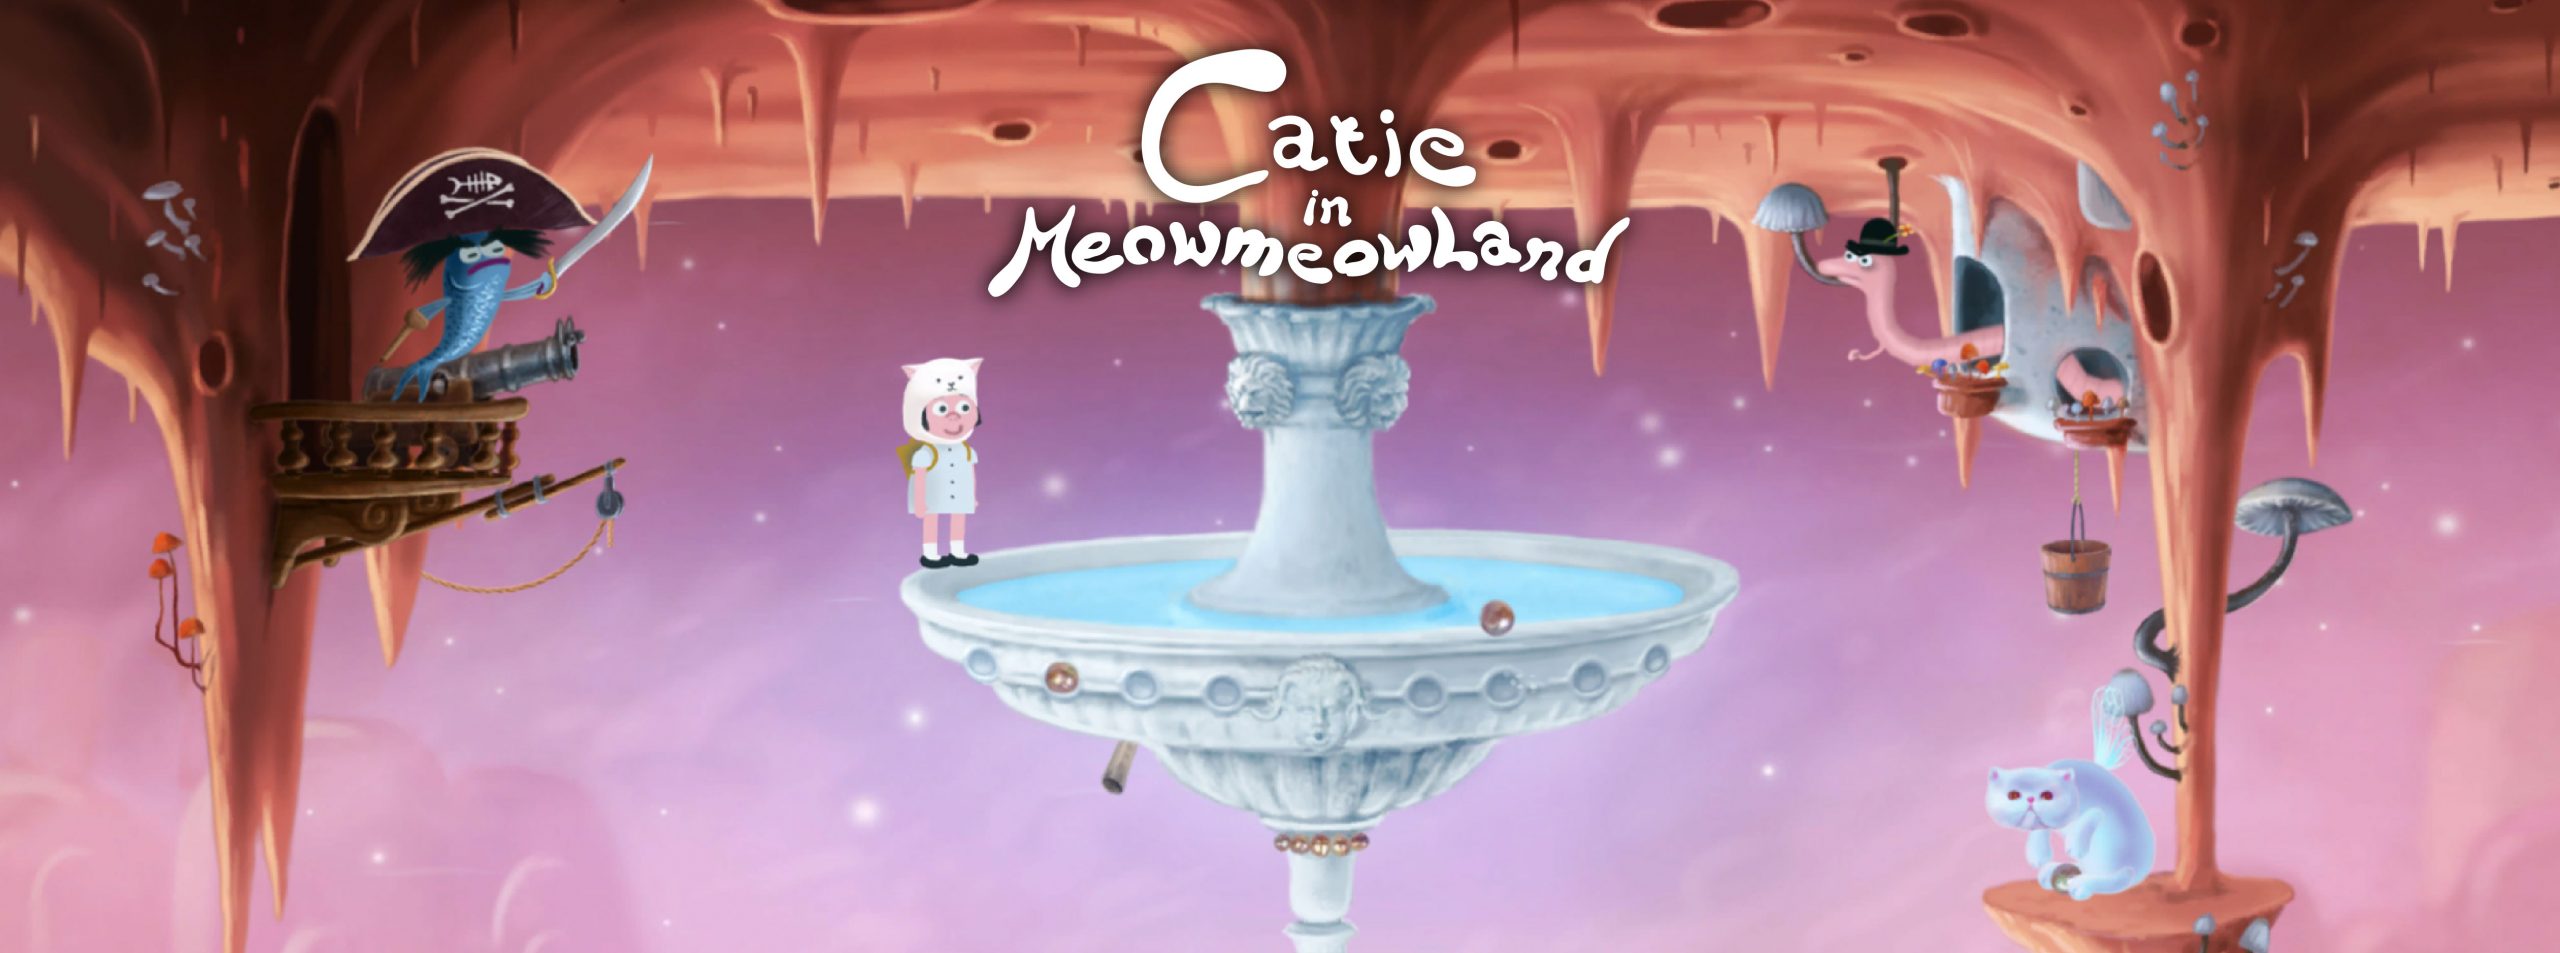 Catie in MeowmeowLand - Introducing cover of point-and-click adventure indie game from Slovakia